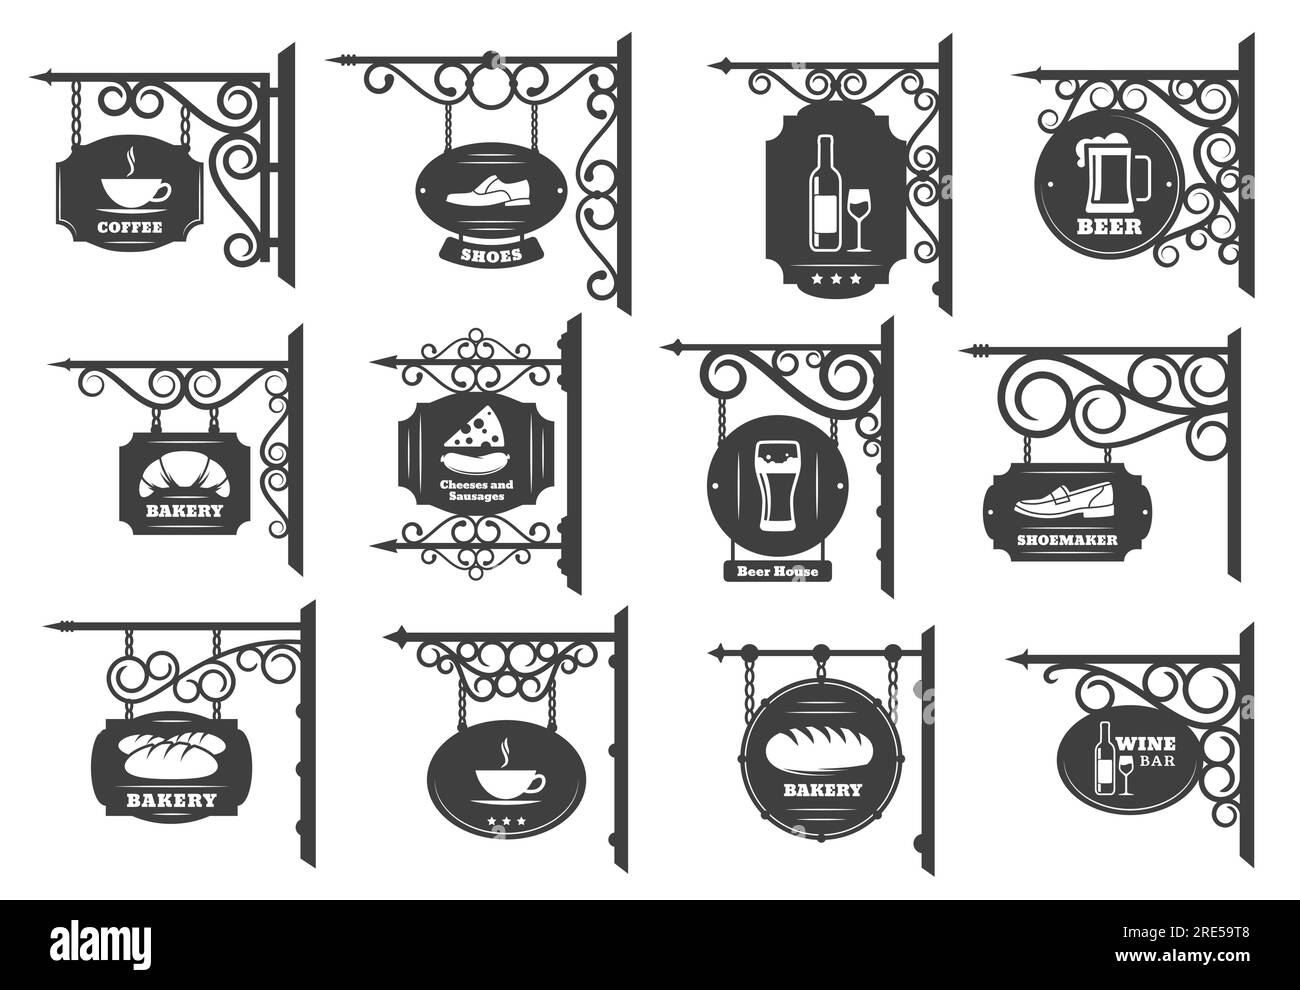 Vintage street signboards vector design. Iron shop sign boards hanging on wrought metal brackets and chains with antique forged ornaments, restaurant, store and cafe, pub or bar and bakery signages Stock Vector